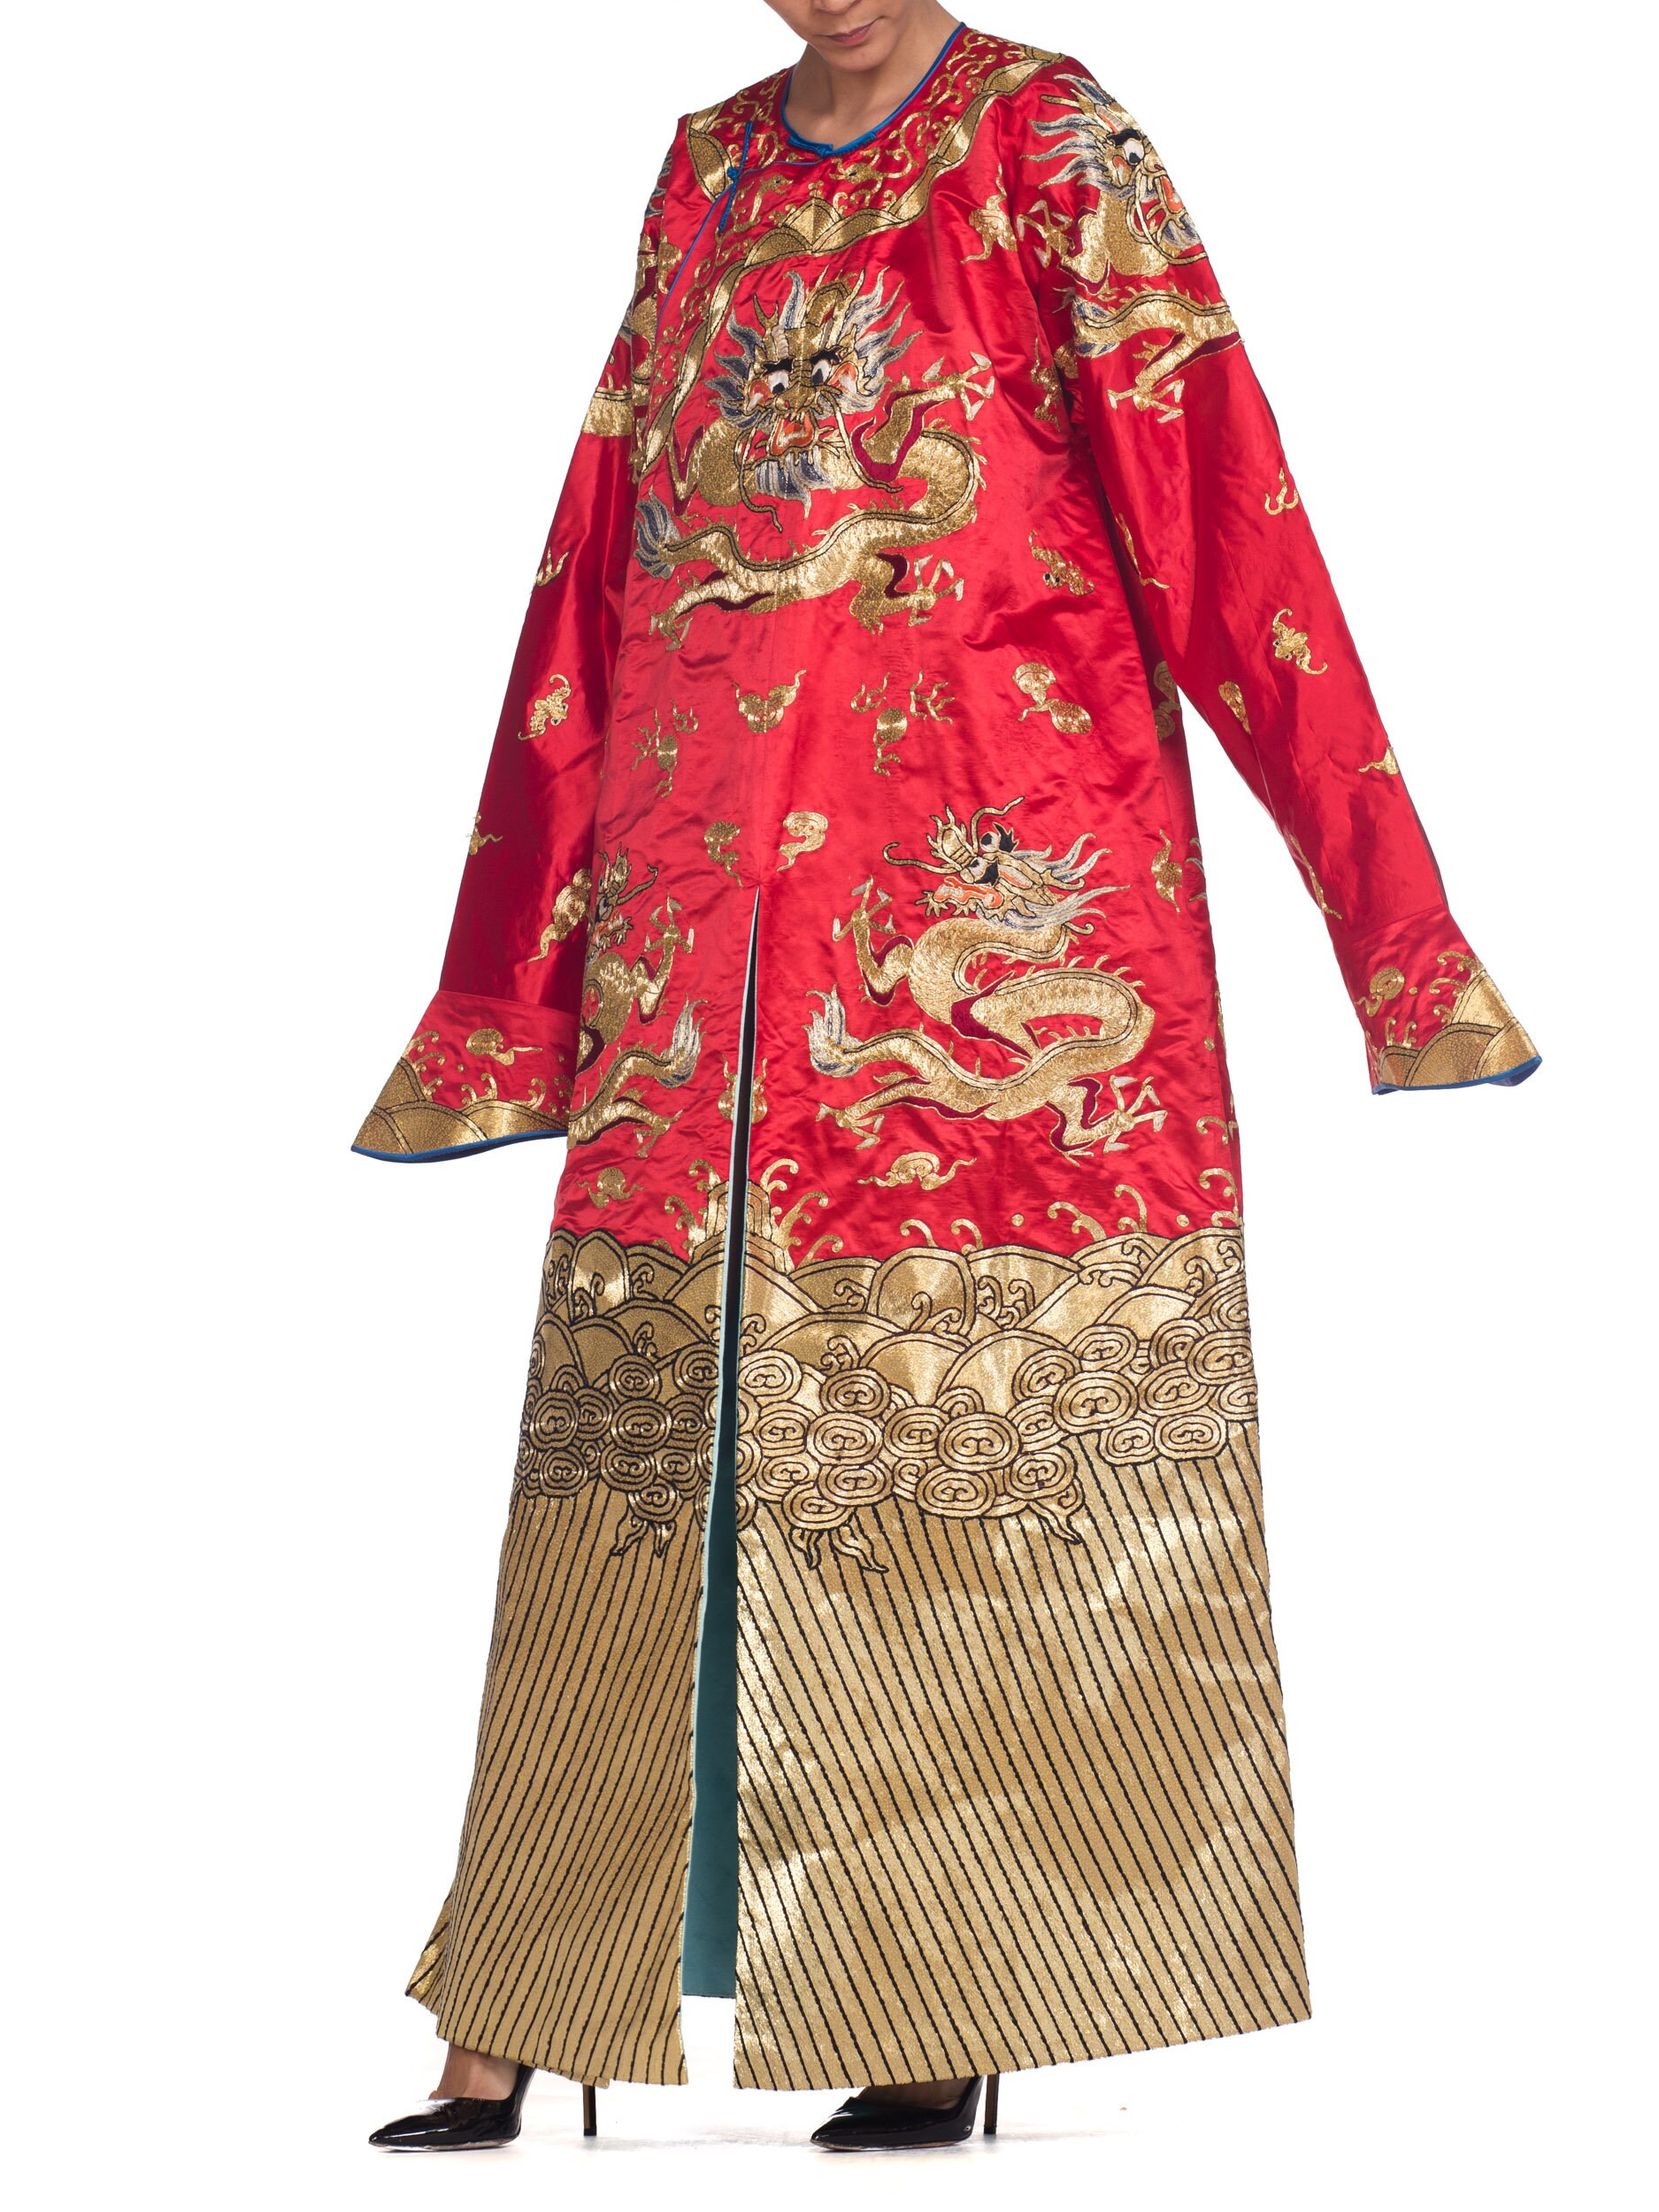 Metallic-golden Dragons Embroidered Red Chinese Opera Robe - Etsy